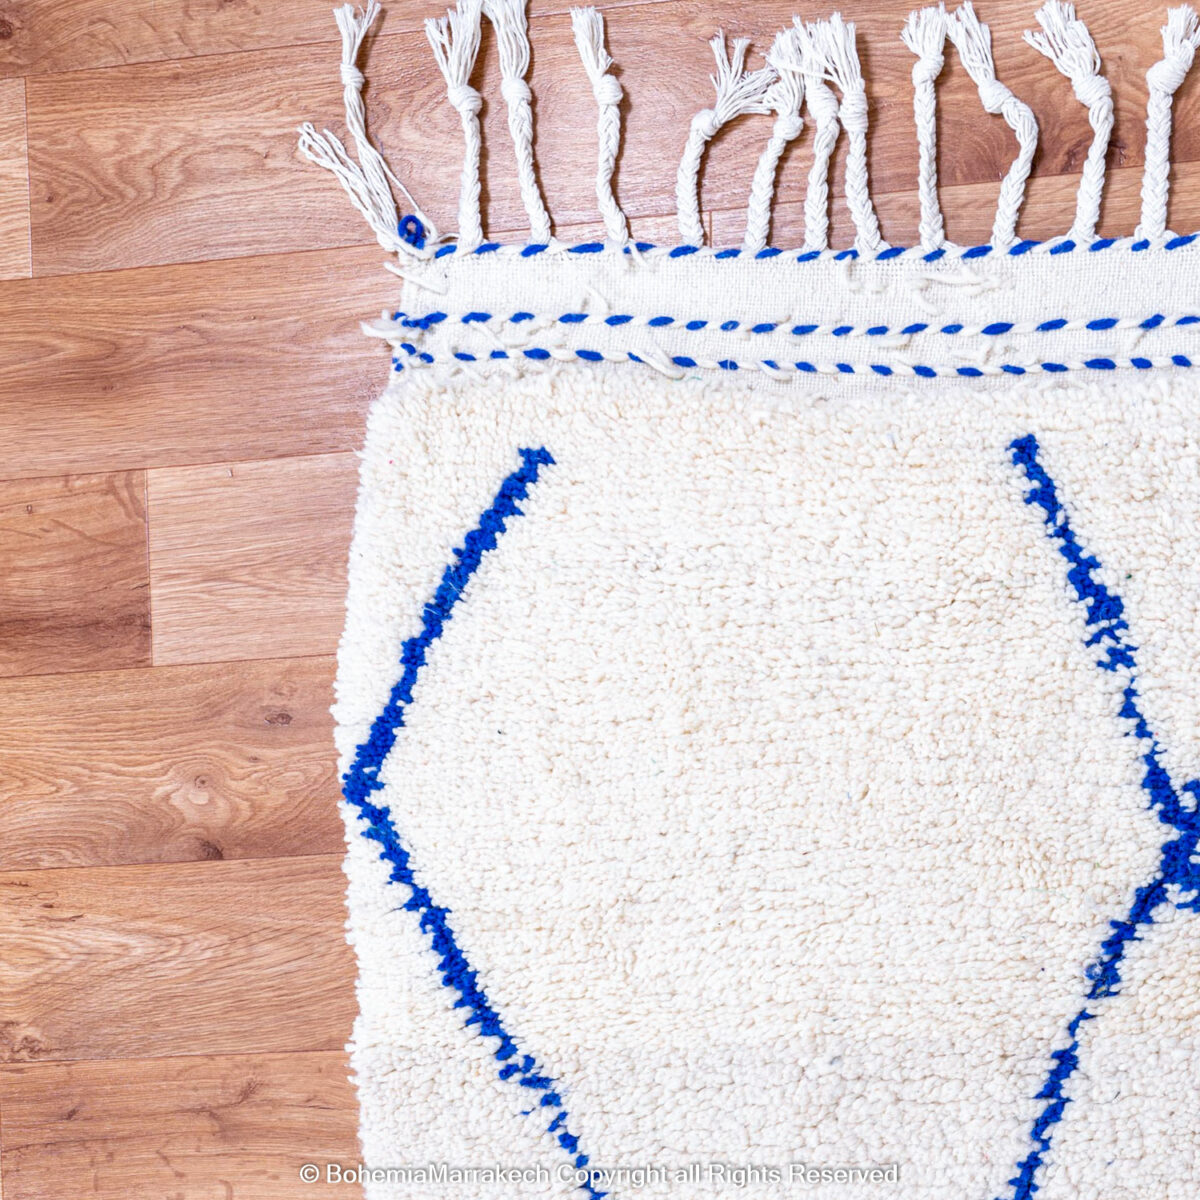 living room rugs, wool rugs, blue rugs, rugs in blue, rug s, rug rugs, area rugs, area carpets, area rugs area rugs, area of a rug, area rugs rugs, area of rug, living room rug carpet, 8 by 10 carpet, 8 x 10 carpet rug, berber carpet, custom rug, bedroom rugs, custom carpet rug, 5 x 7 rugs, area rugs 8 x 10, 5 x 7 carpet, berber flooring, 8 x 10 area carpet, store carpets, checkered rugs, cheap carpets and rugs, cheap carpet rugs, carpet and rug stores near me, carpet rug stores near me, checkered carpets, rugs at Home Depot, cheap cheap rugs, large area rugs, shag rugs, large room rugs, large area carpets, massive area rug, large area carpet rugs, carpet shag, big area carpet, area rug huge, store rugs, area rugs on sale, 8 x 10 rug, cheapest area rugs, rugs 3 x 5, blue carpet rug, carpet 3 x 5, rug for sell.